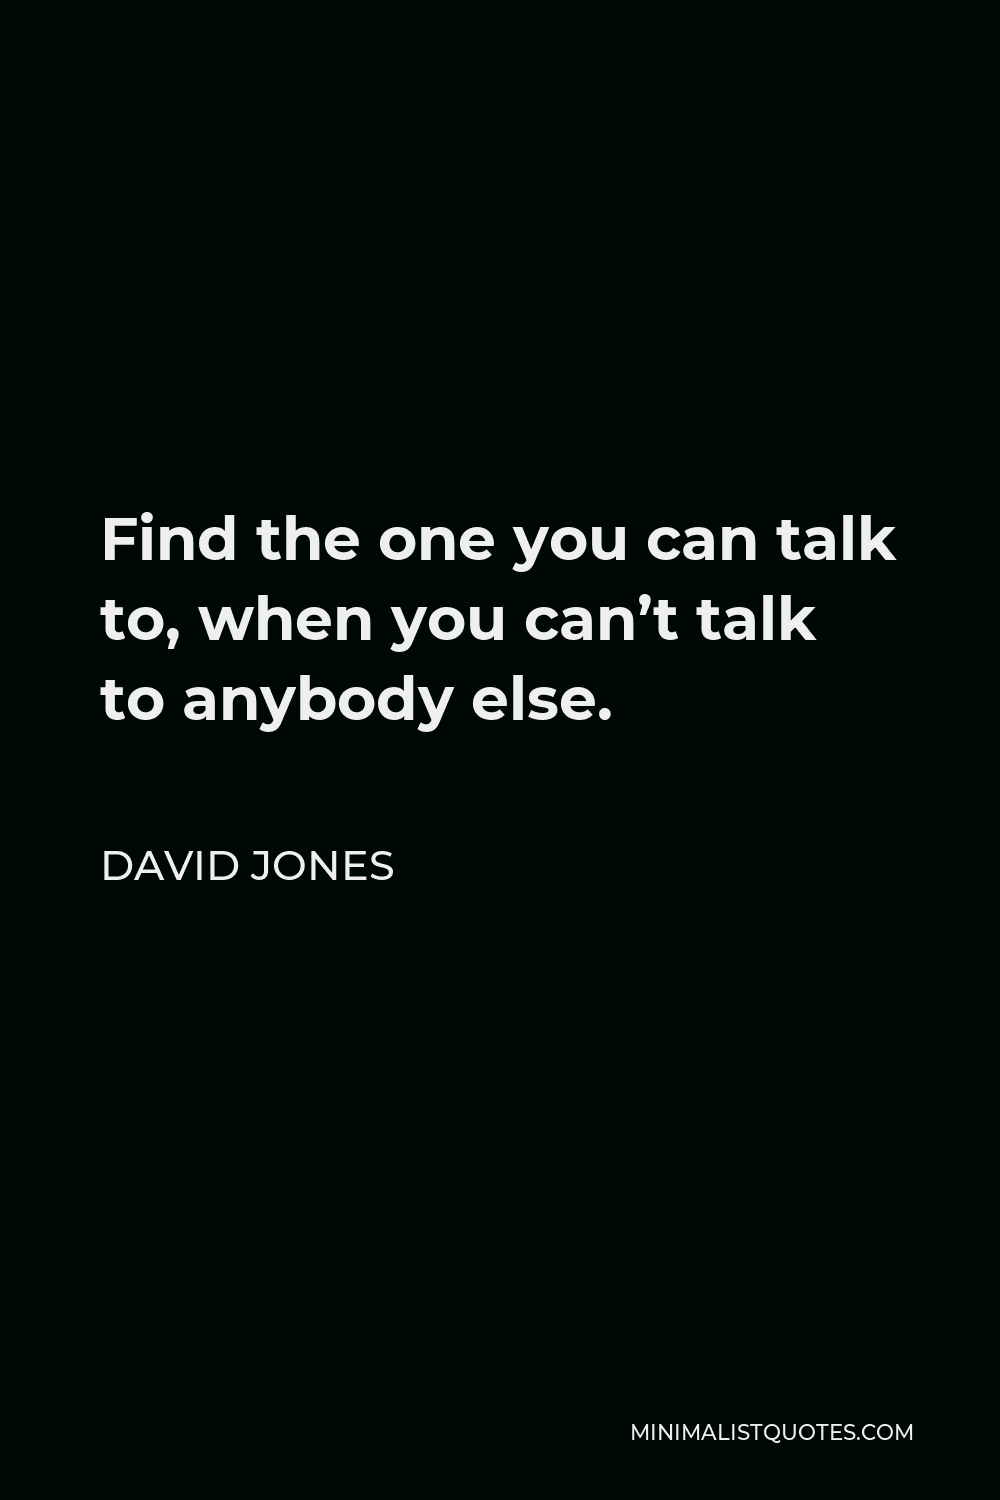 David Jones Quote - Find the one you can talk to, when you can’t talk to anybody else.